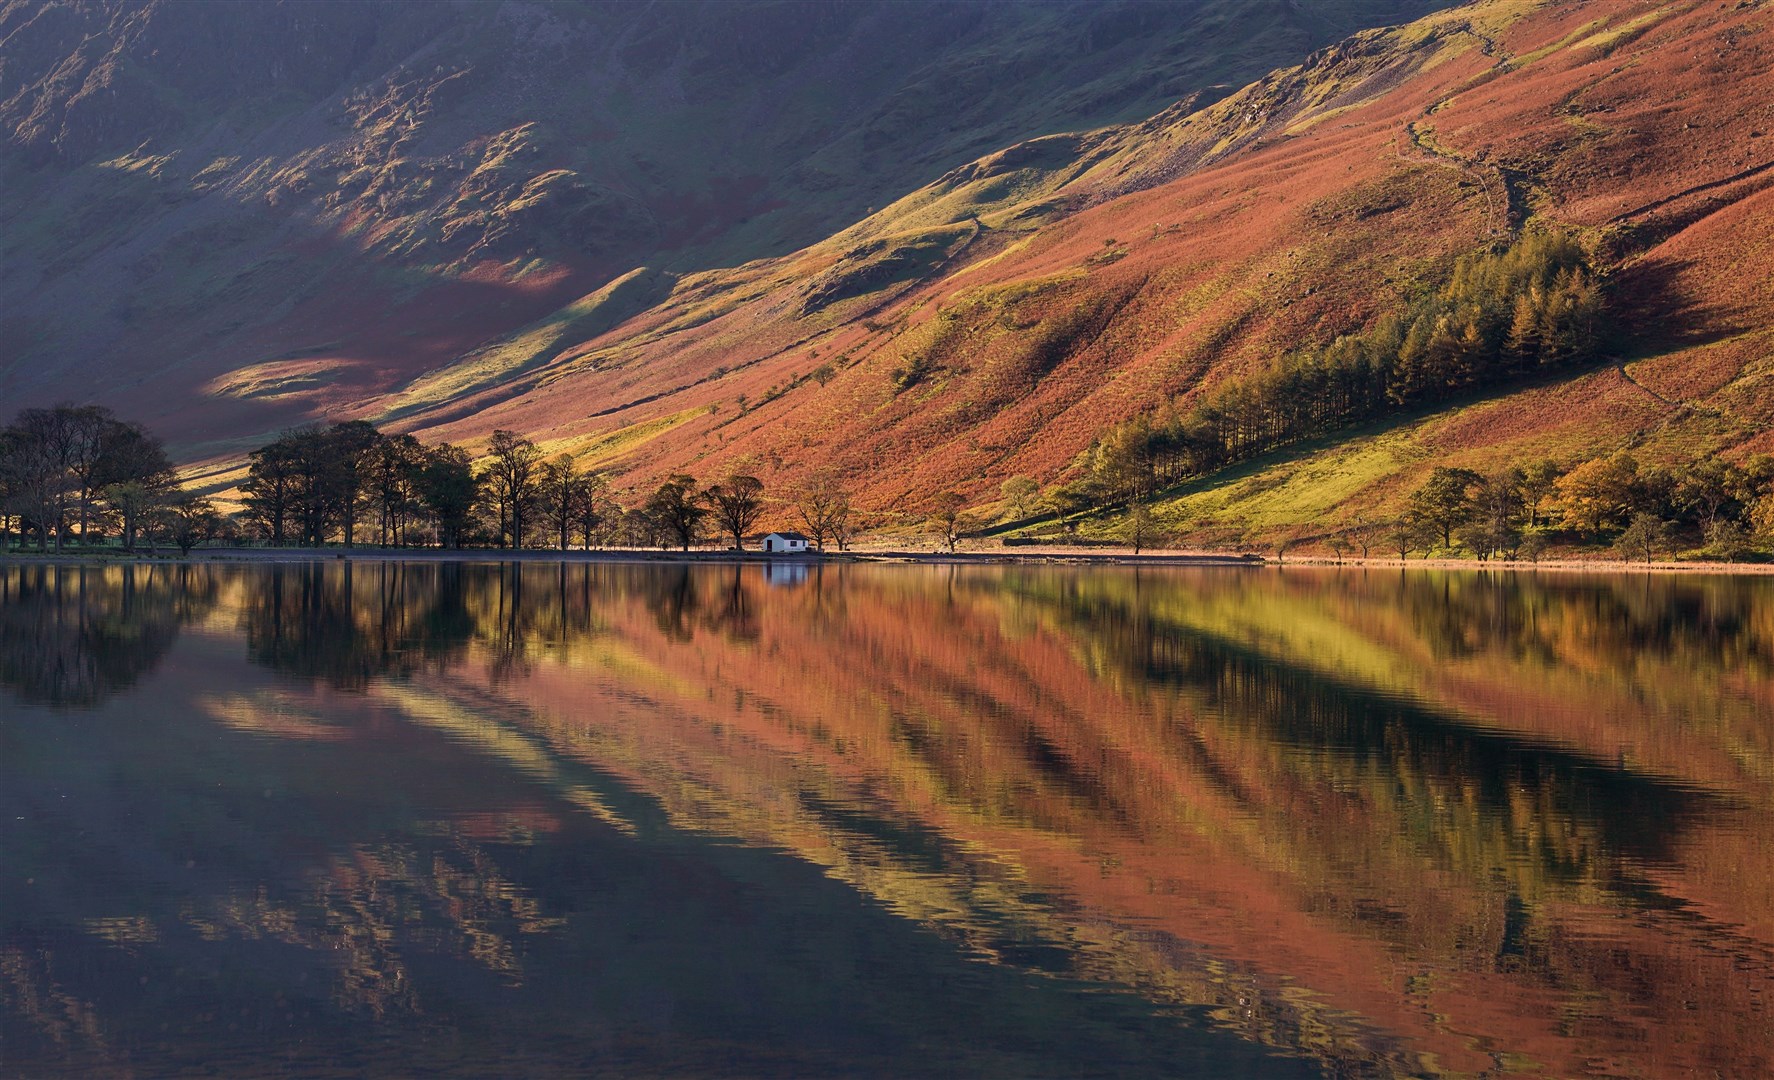 Autumnal reflections in Lake Buttermere (Owen Humphreys/PA)